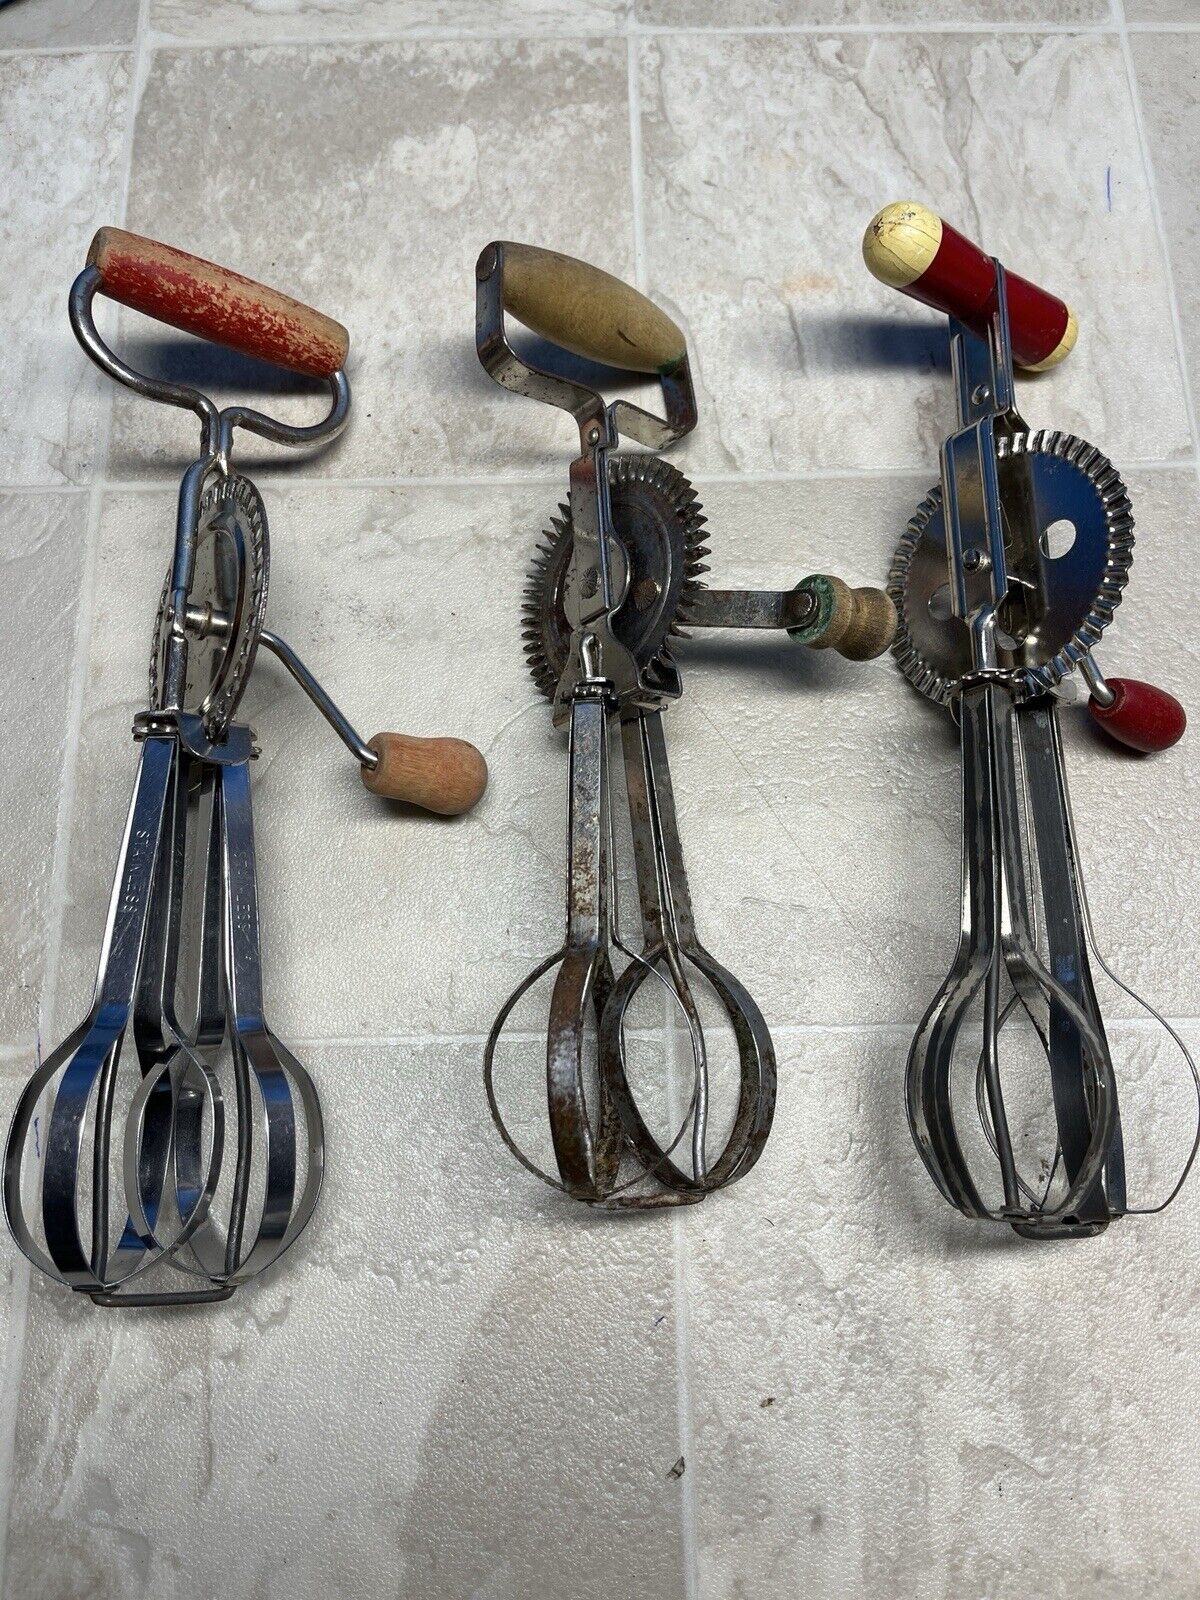 Lot of 3 Vintage Egg Beaters Hand Mixers  Kitchen Utensils Tools EKCO Edlund